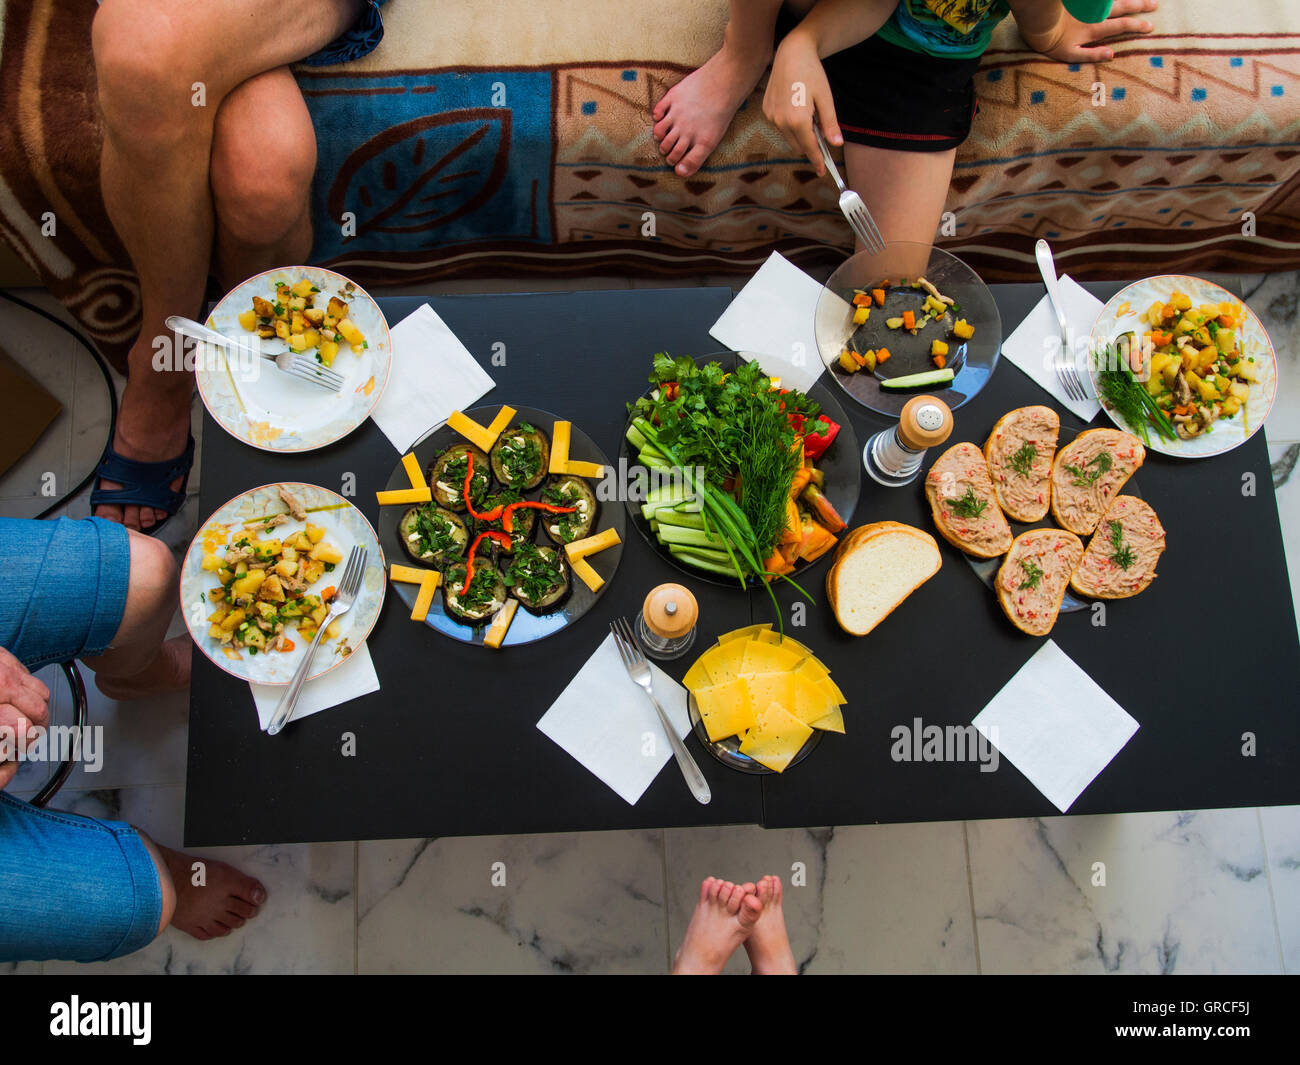 Top view of family party near a Table setting with a variety of side dishes Stock Photo